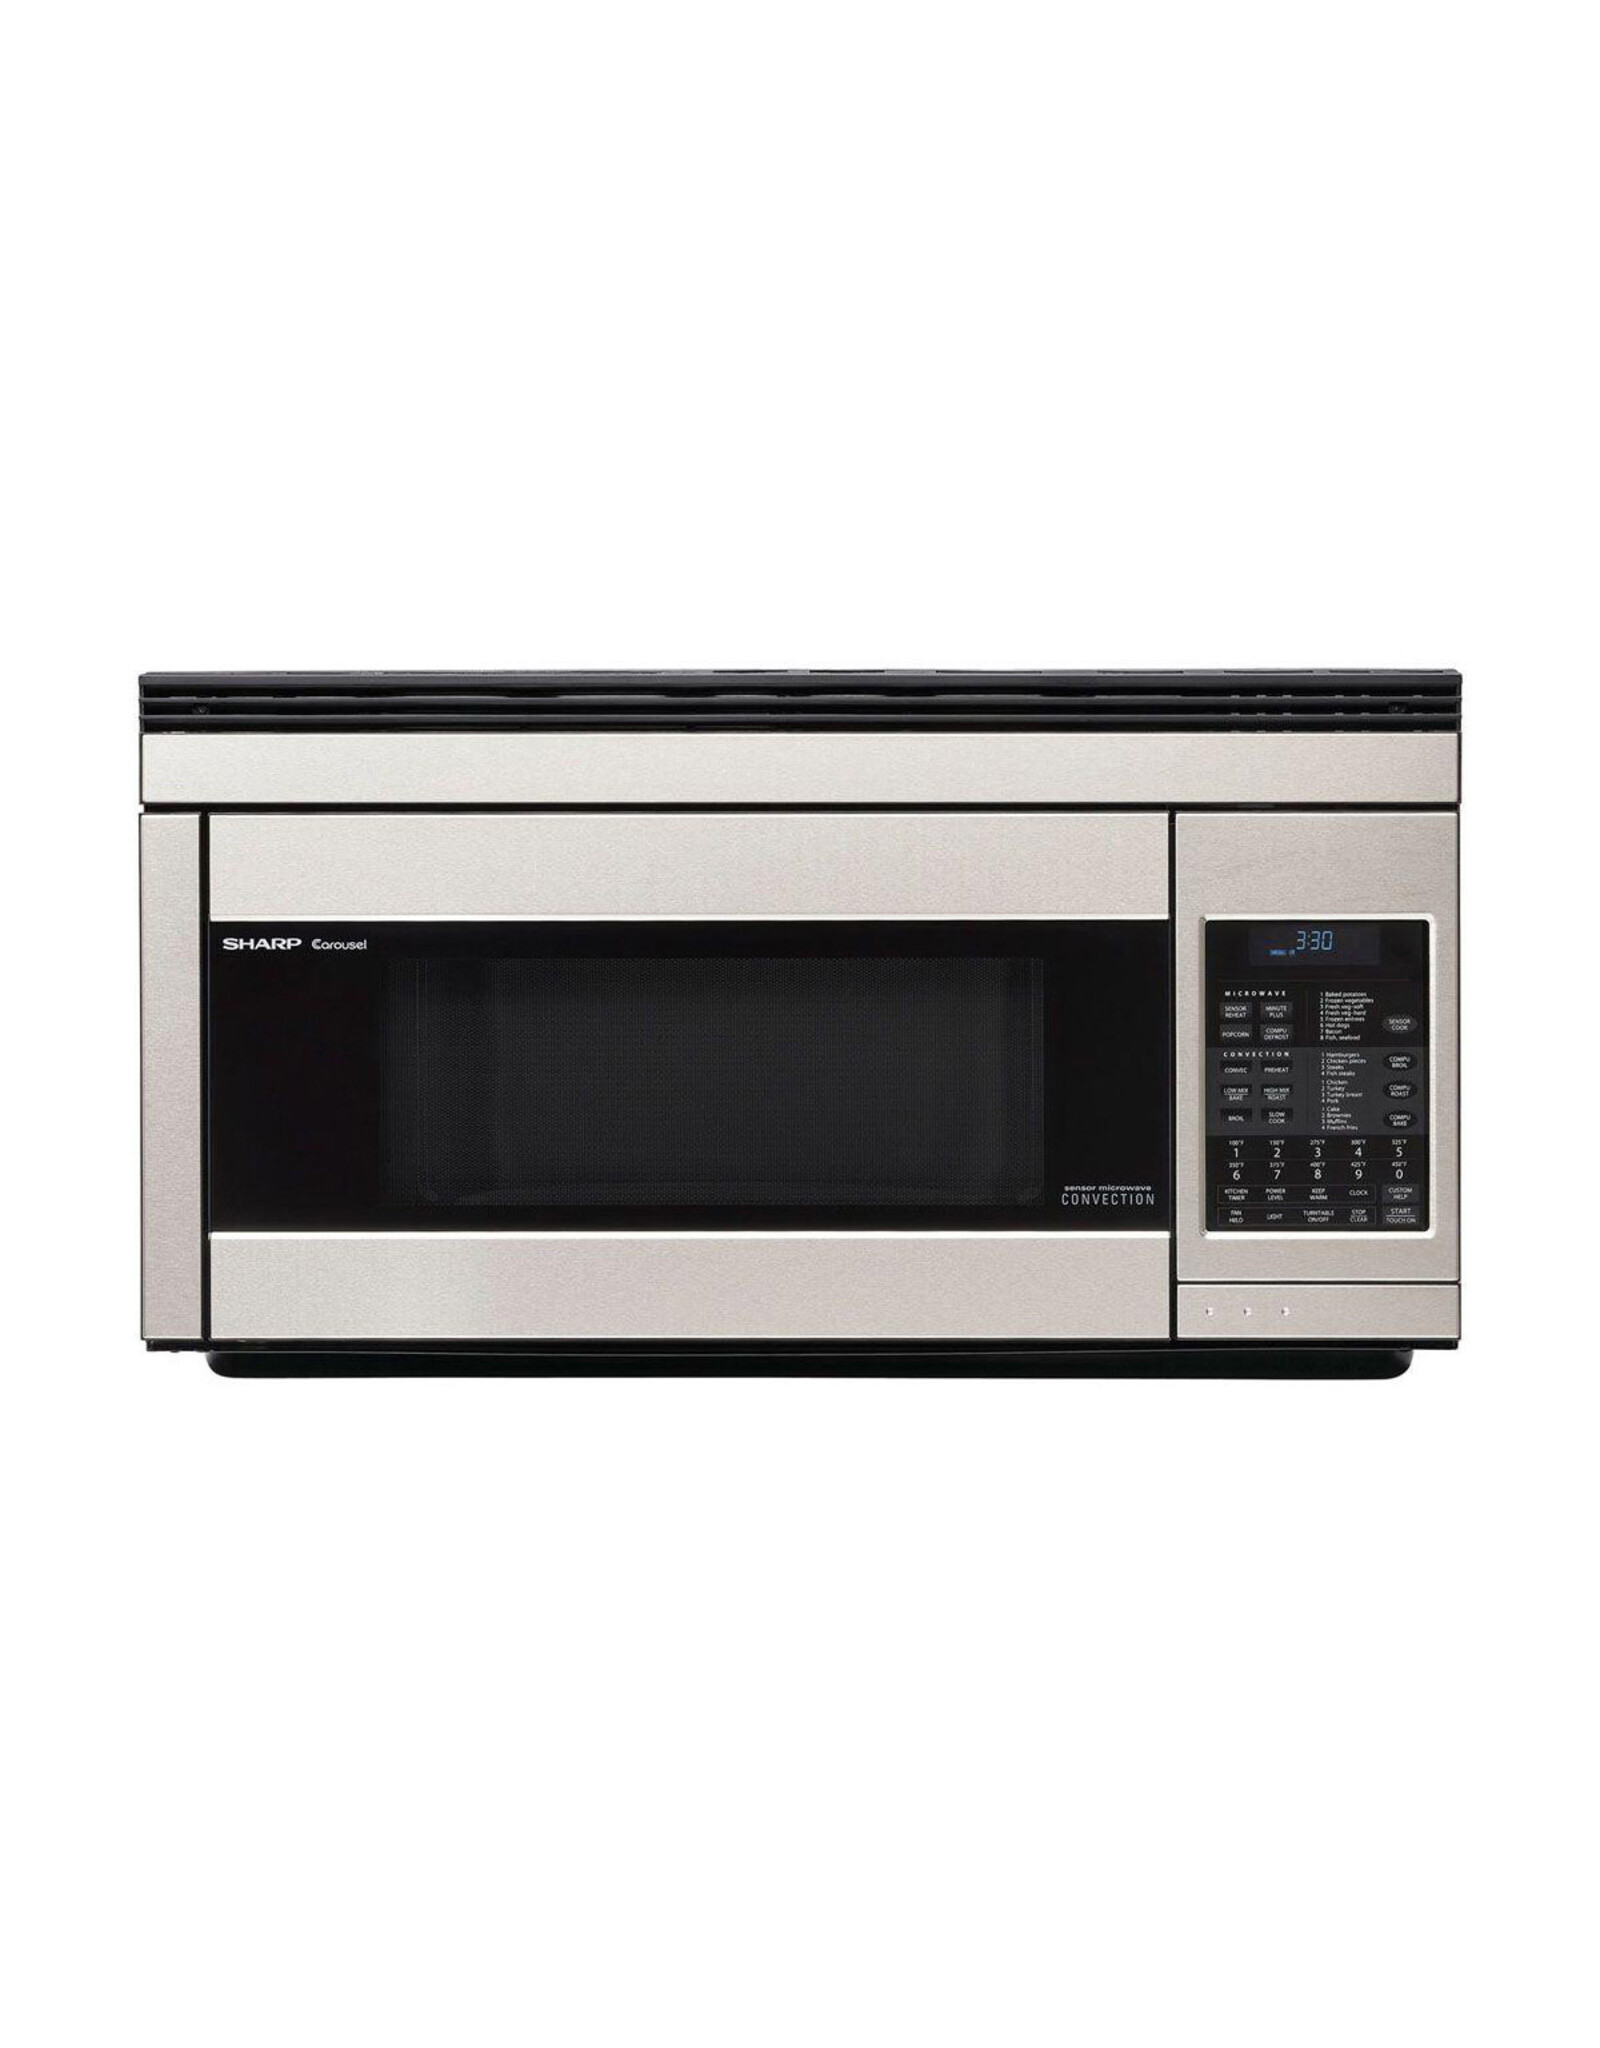 1.1 cu. ft. 850W Sharp Stainless Steel Over-the-Range Convection Microwave Oven (R1874TY)